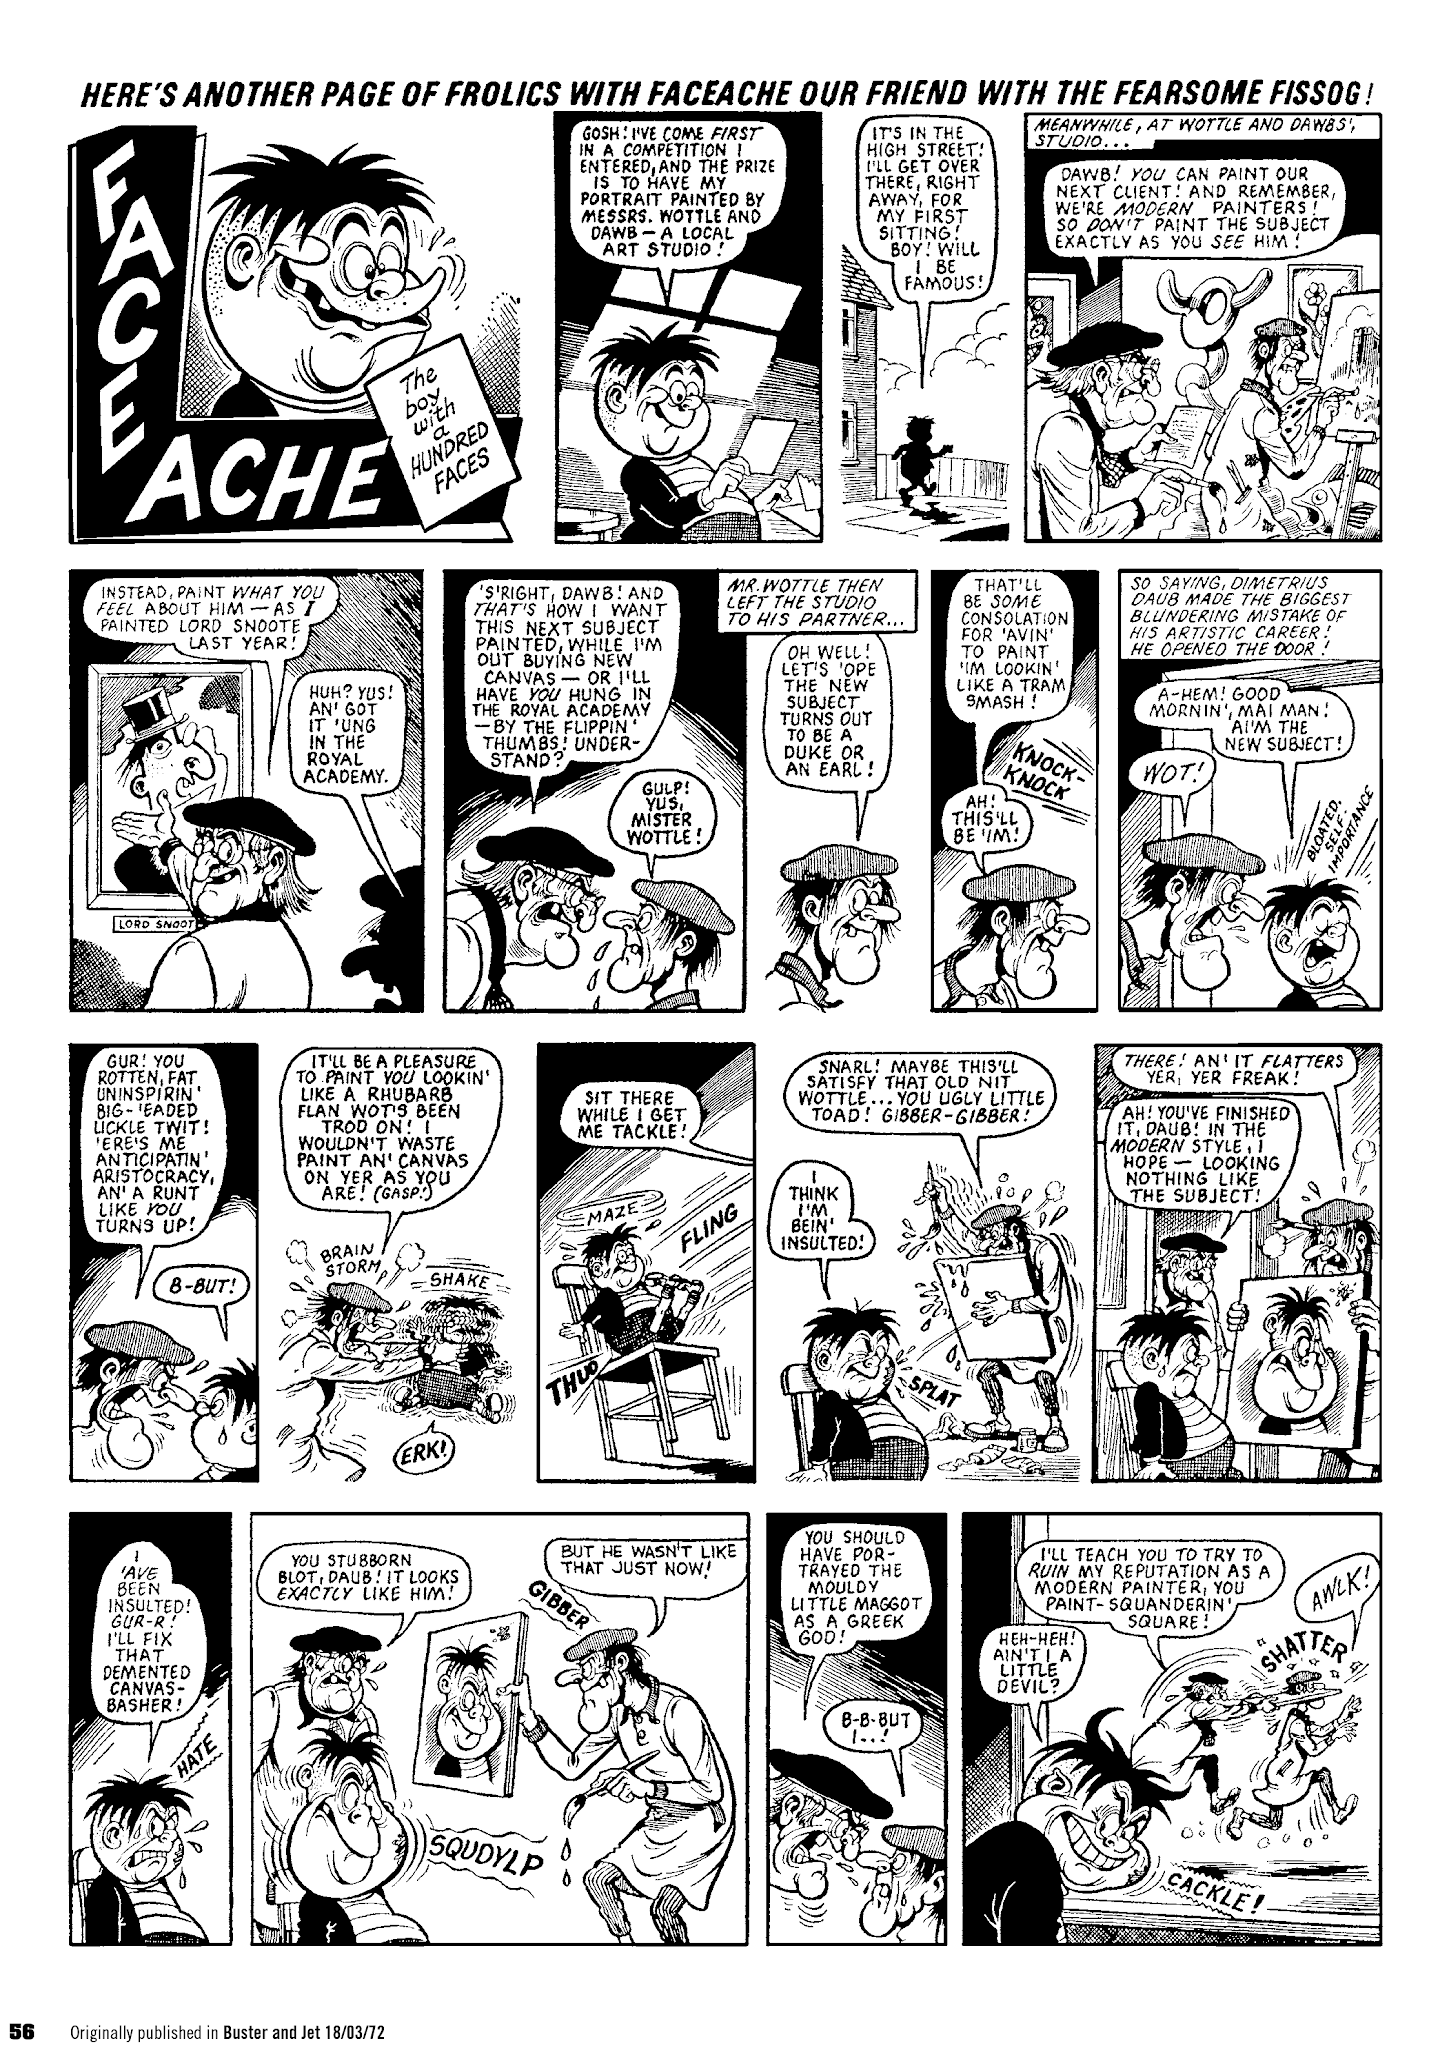 Read online Faceache: The First Hundred Scrunges comic -  Issue # TPB 1 - 58